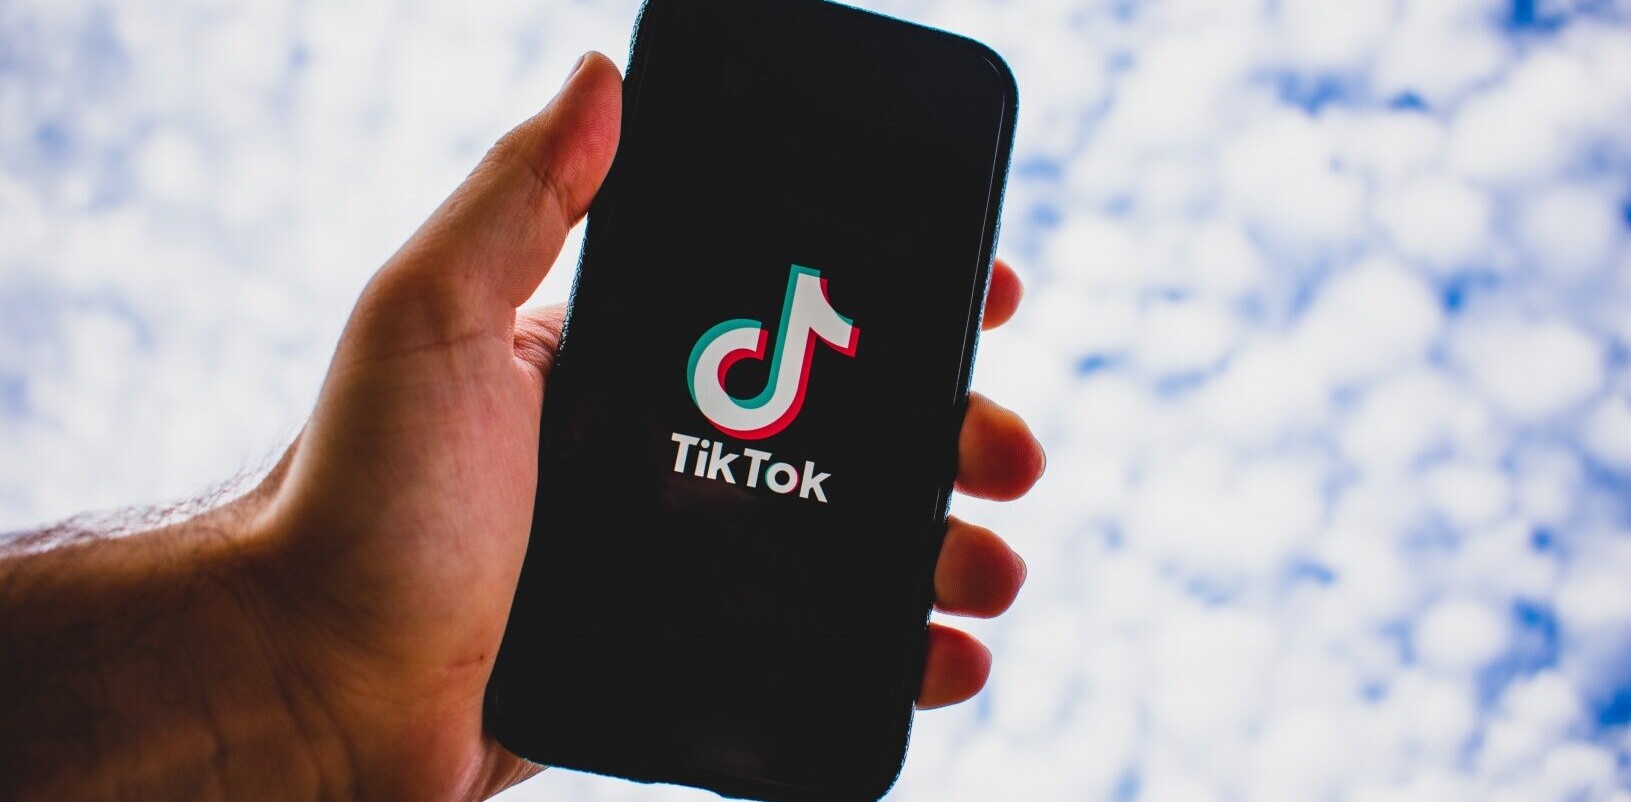 TikTok will take Trump administration to the court over ban